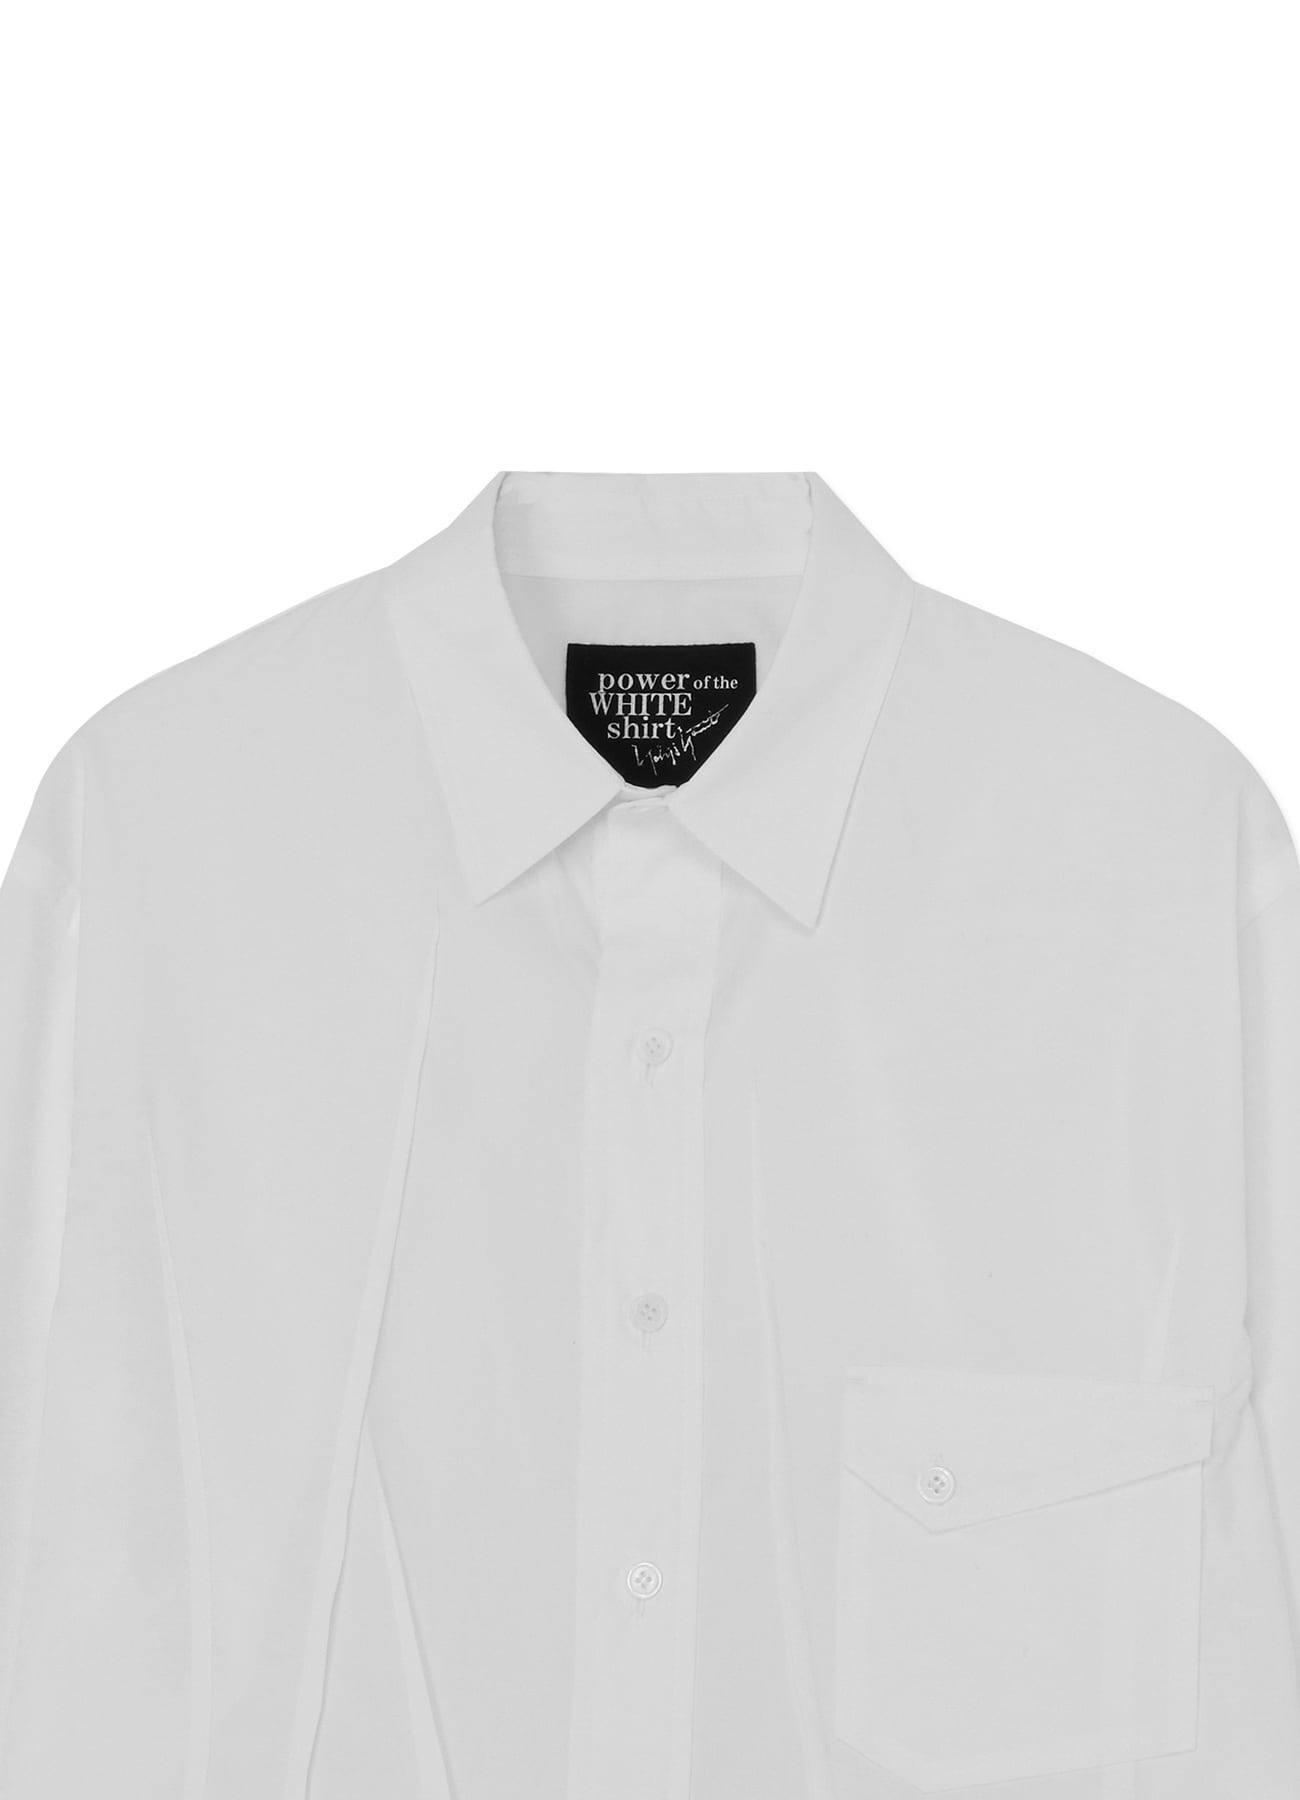 P・100/2 BROAD J-FRONT DARTS SHIRT(S White): power of the WHITE 